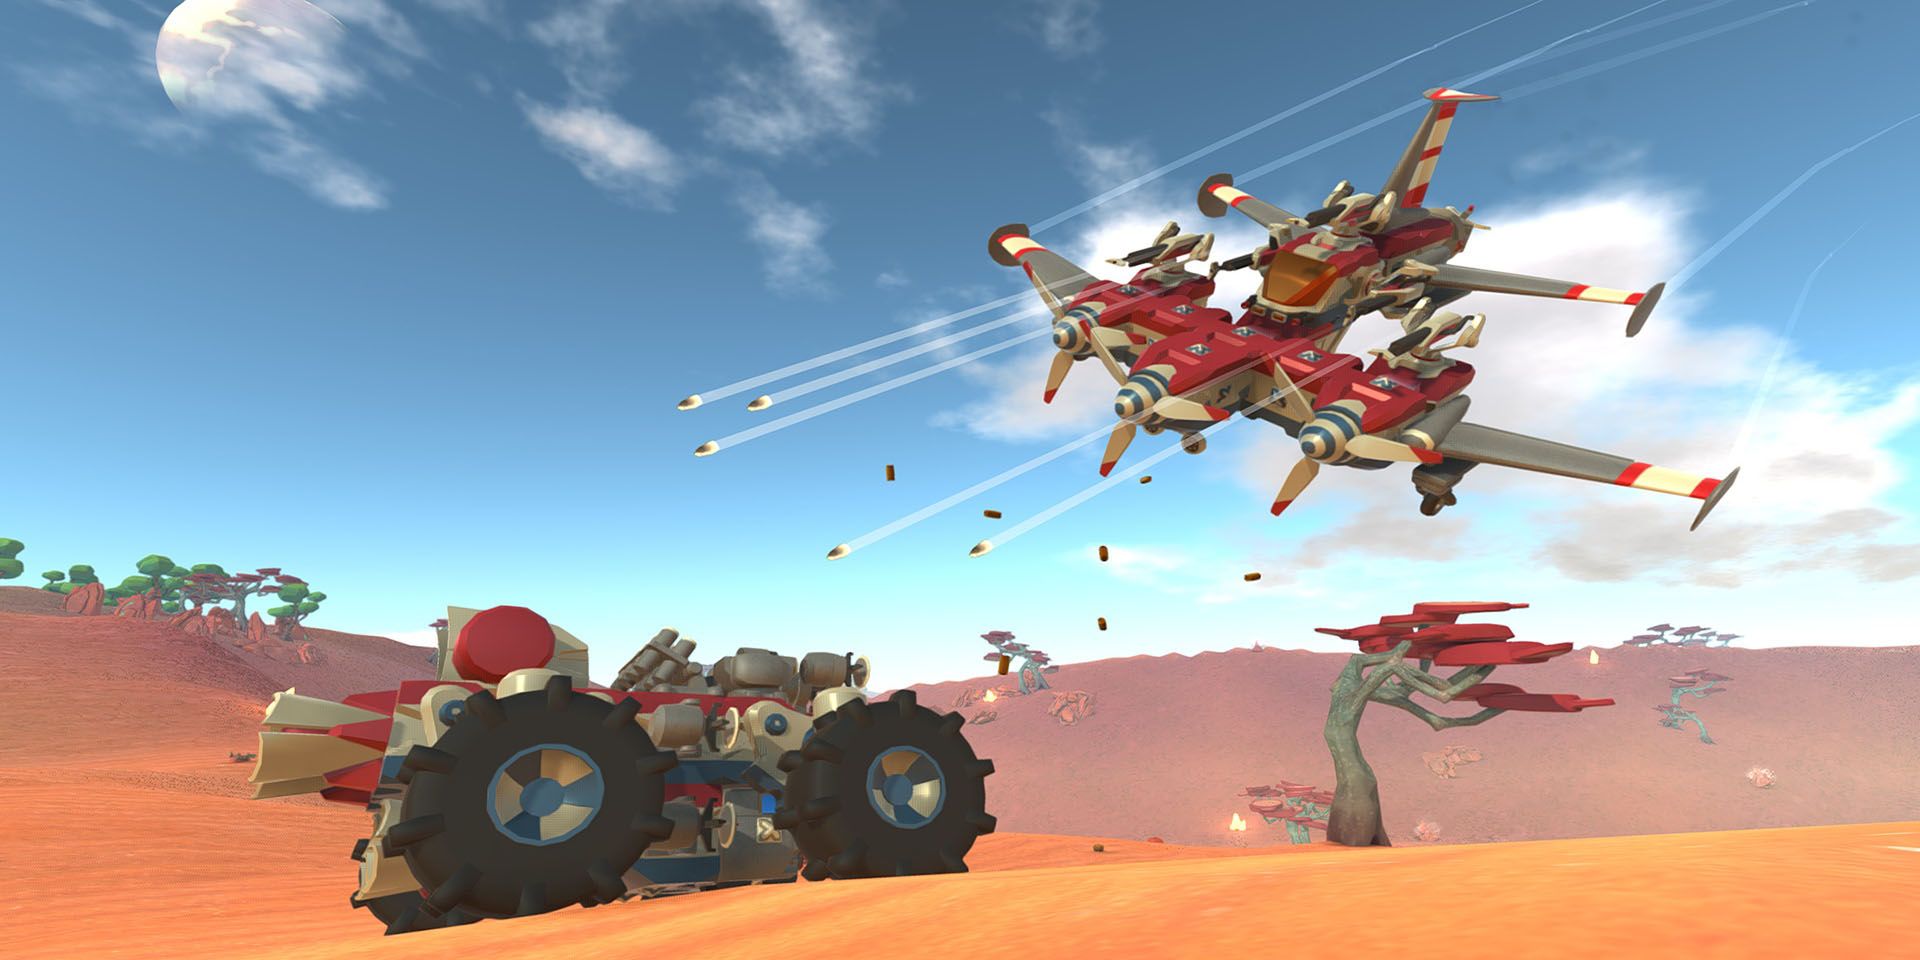 Terratech promo image showing two player-made vehicles, a jet-powered car and a three-propeller plane, battling it out over a sandy environment